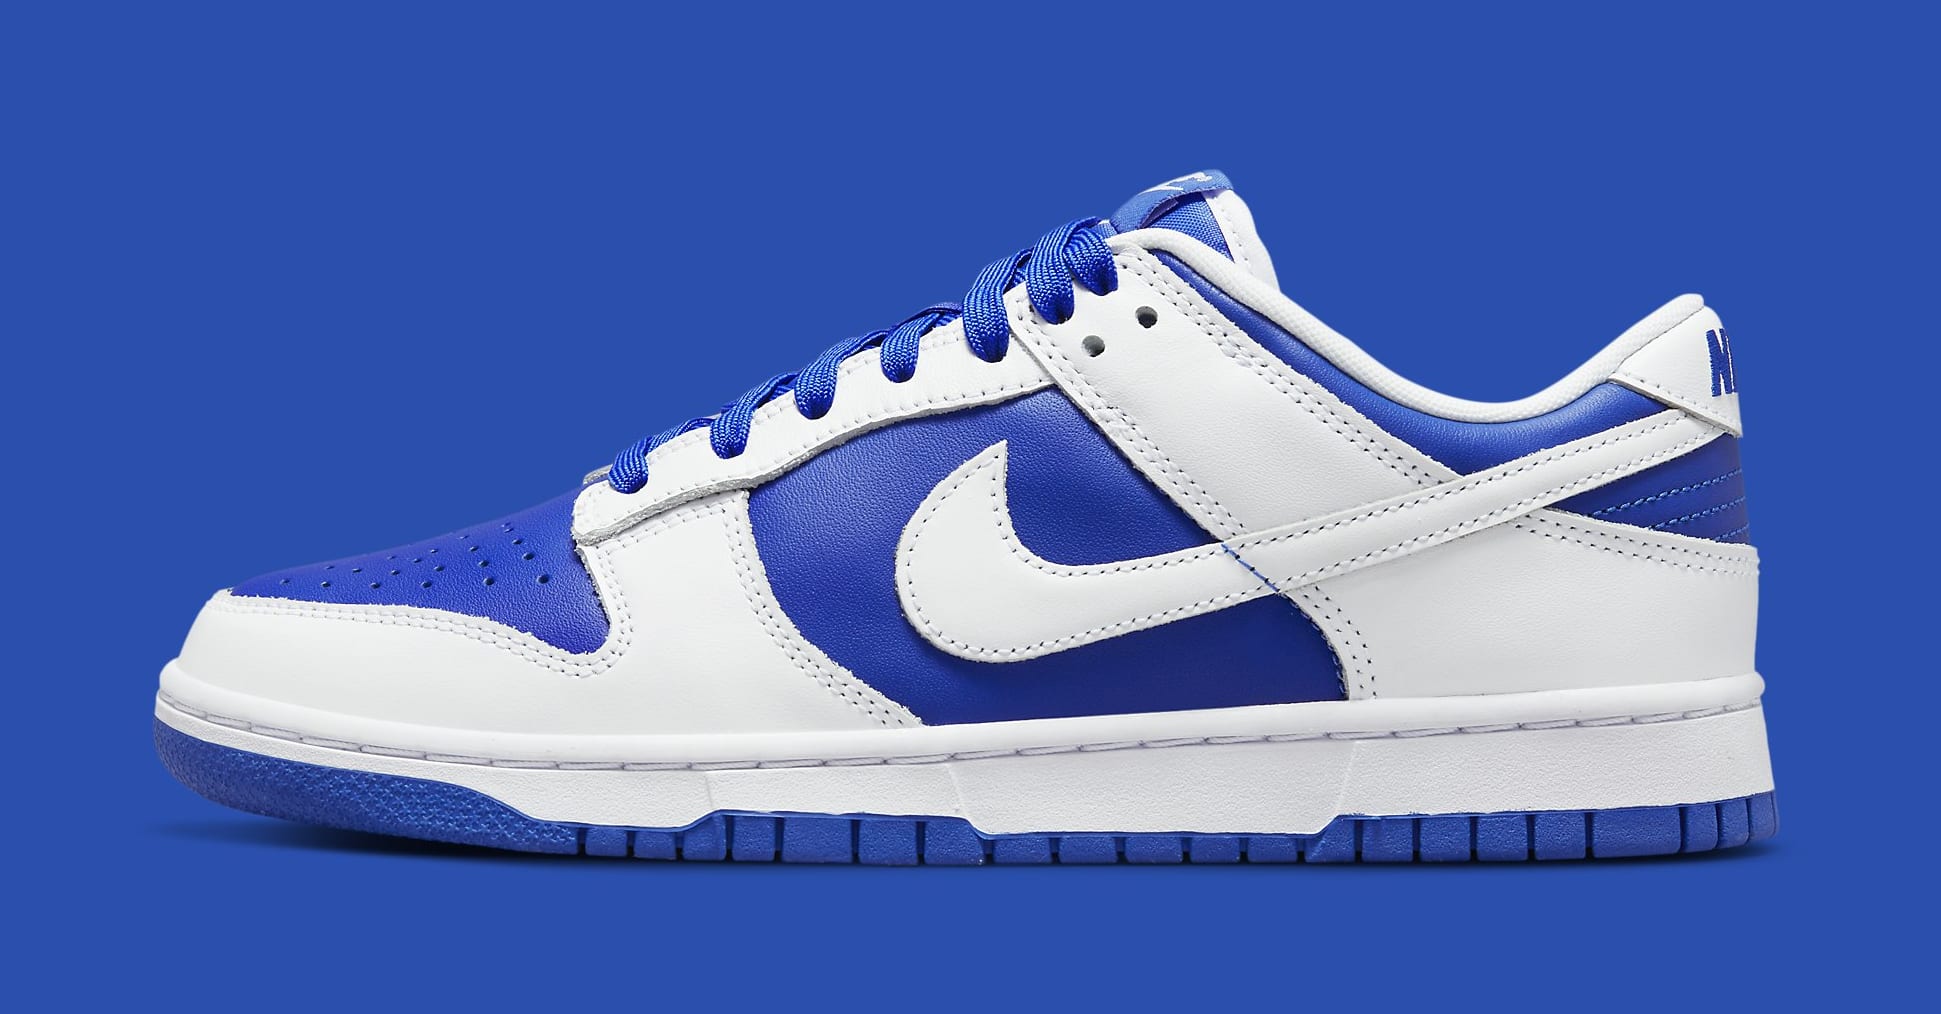 Best Look Yet at the 'Reverse Kentucky' Nike Dunks | Complex